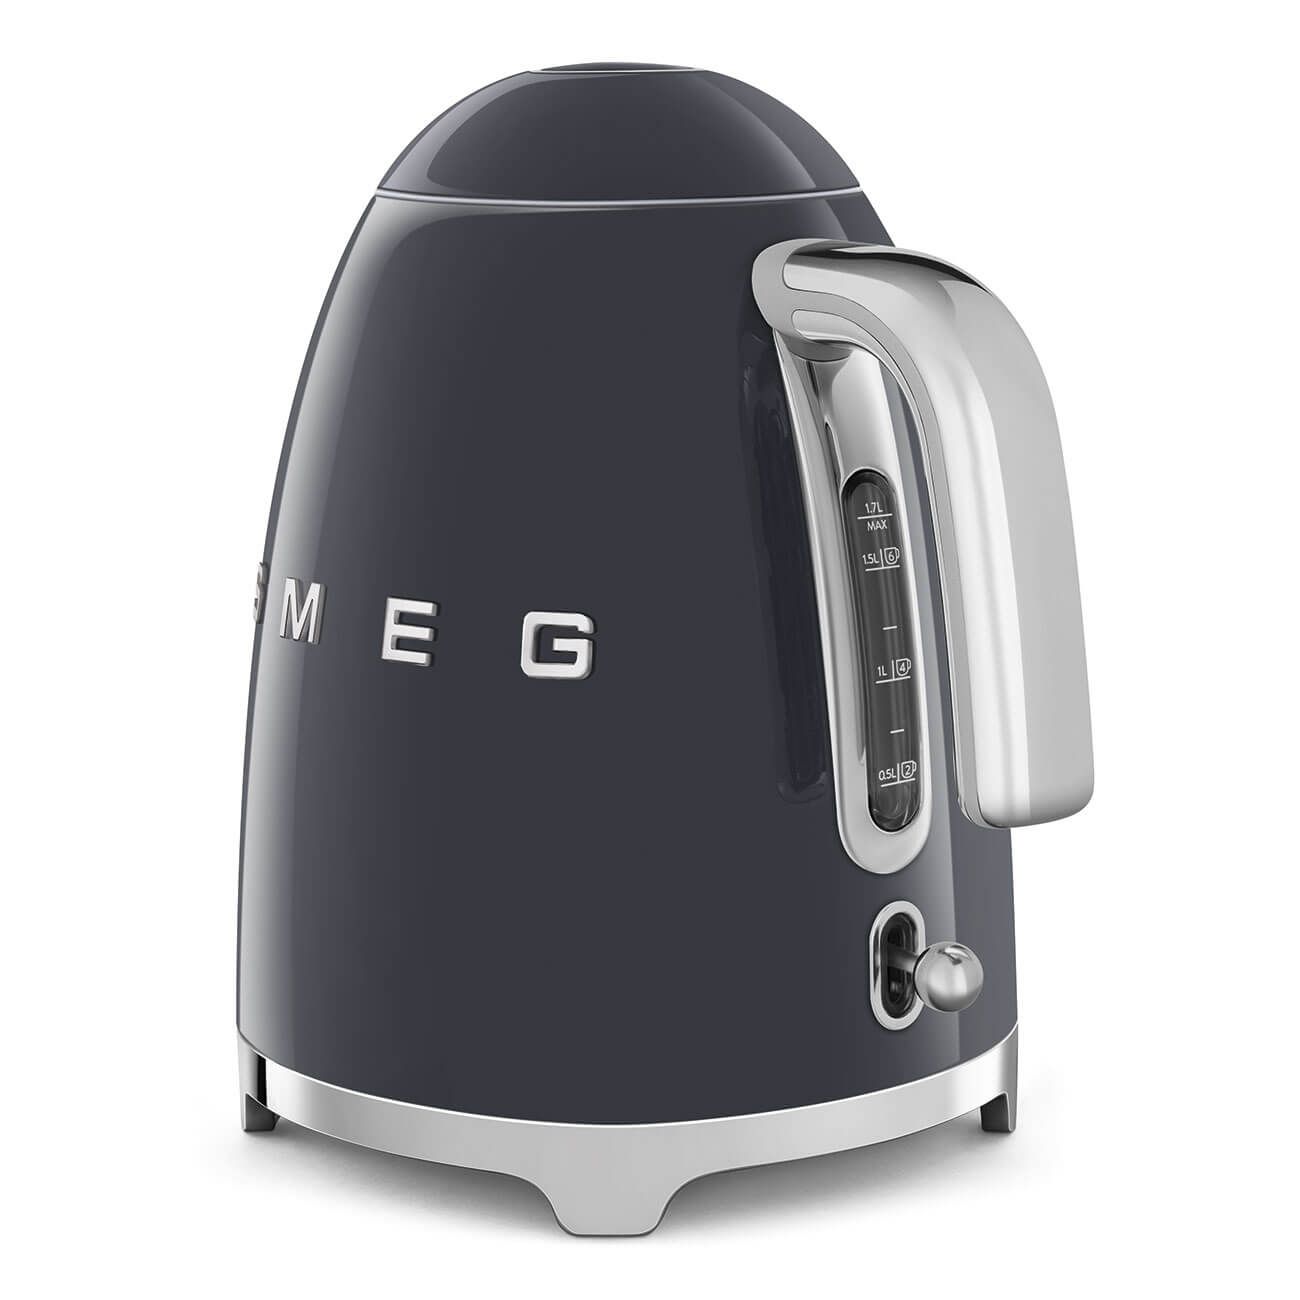 SMEG Retro Variable Temperature Kettle in 4 Colors, Stainless